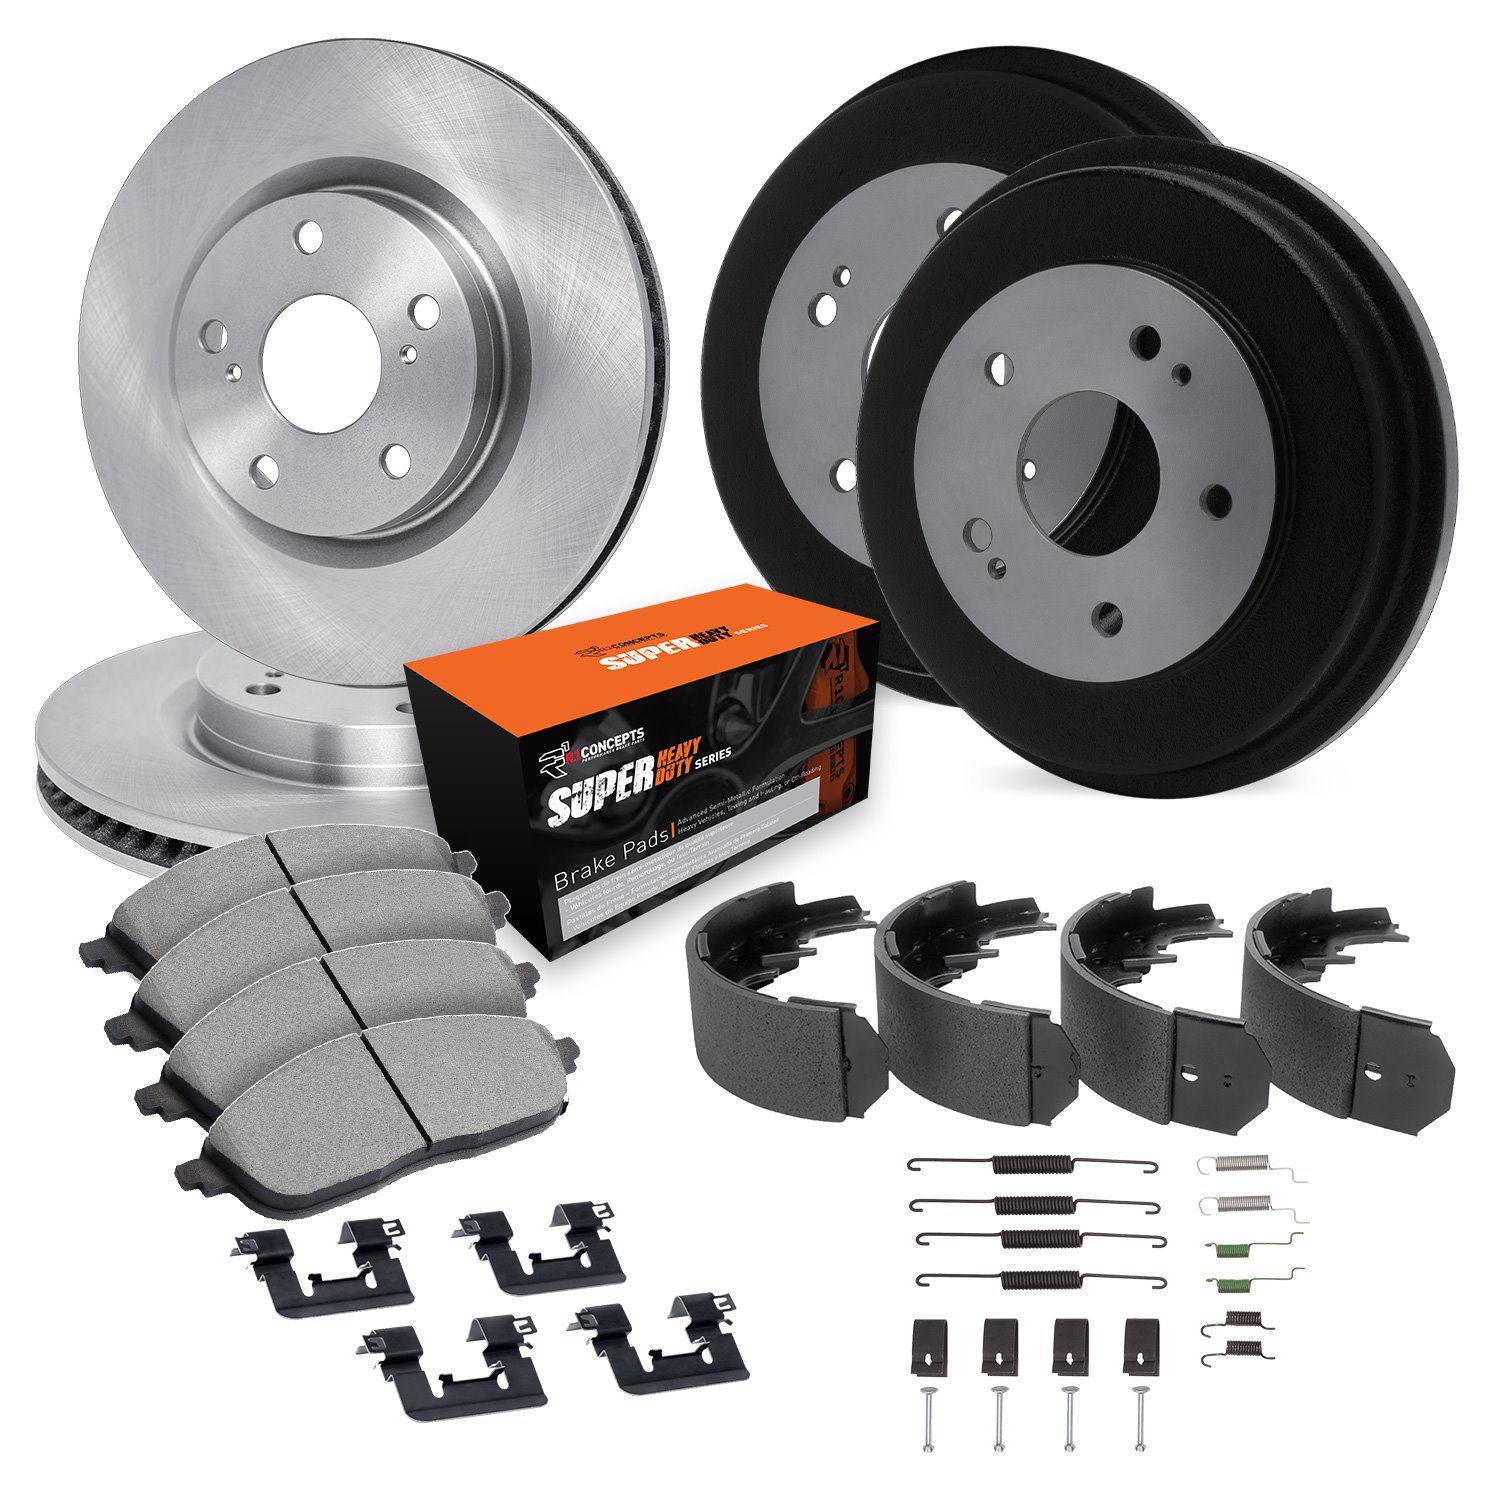 E-Line Blank Brake Rotor & Drum Set w/Super-Duty Pads, Shoes, Hardware, & Adjusters, 1990-1991 Ford/Lincoln/Mercury/Mazda